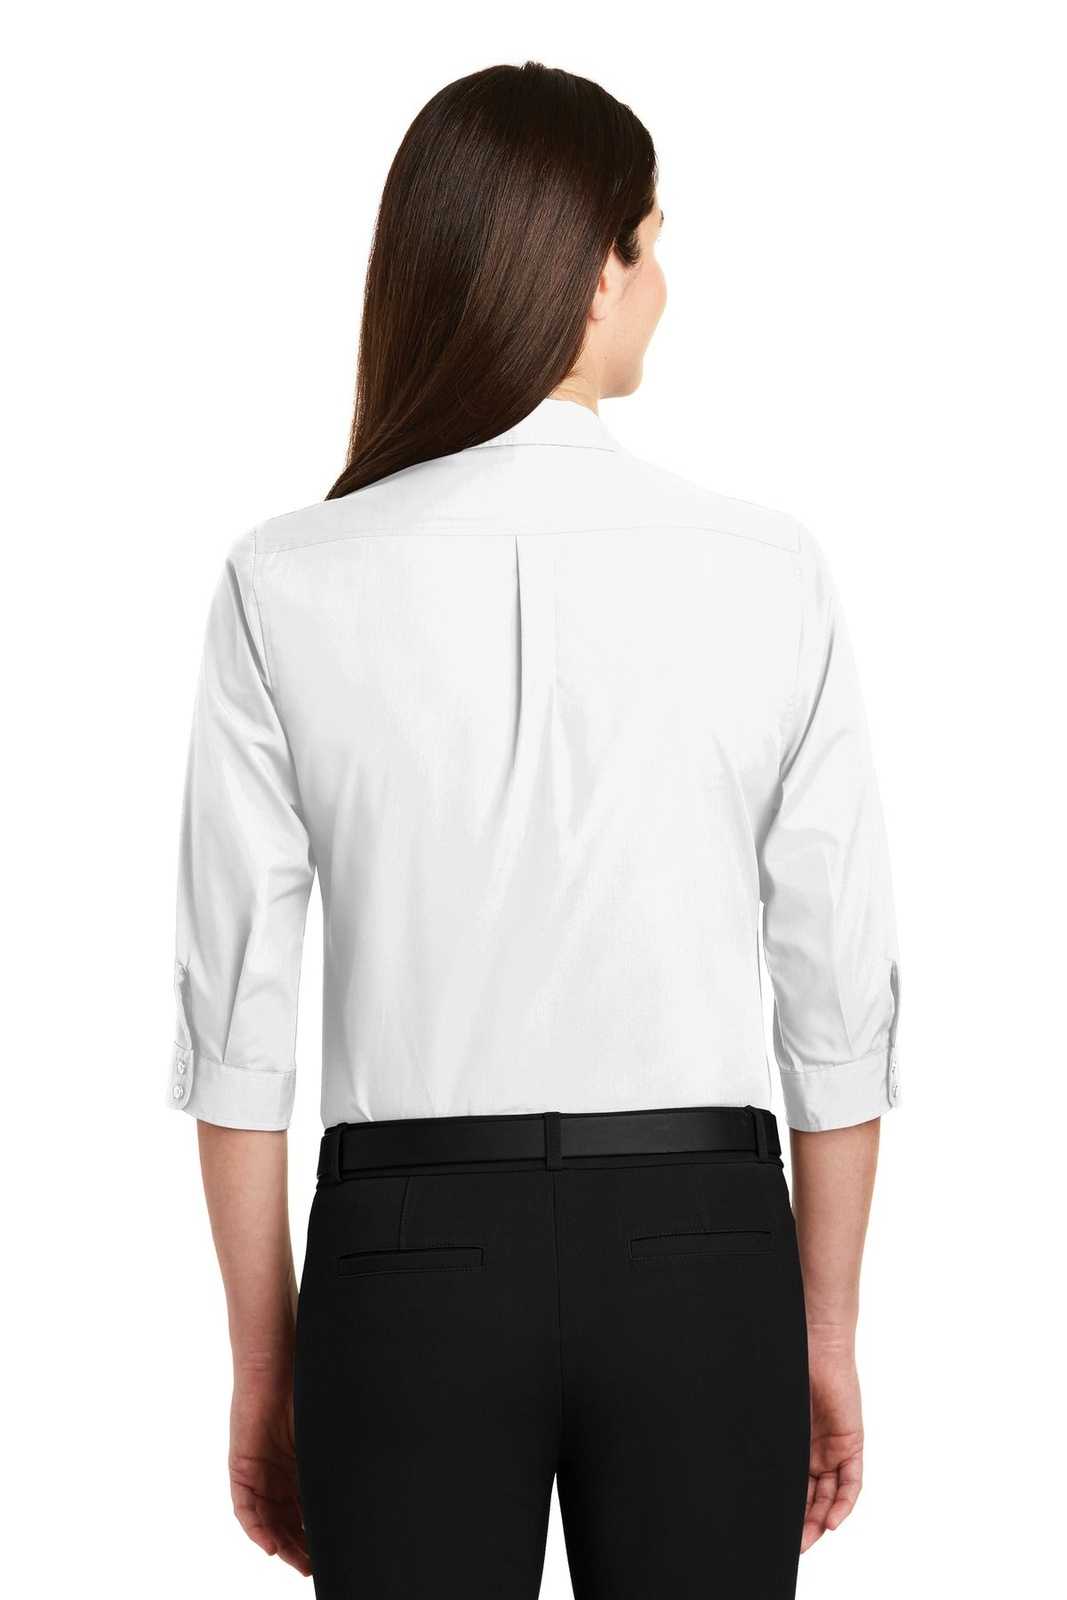 Port Authority LW102 Ladies 3/4-Sleeve Carefree Poplin Shirt - White - HIT a Double - 1